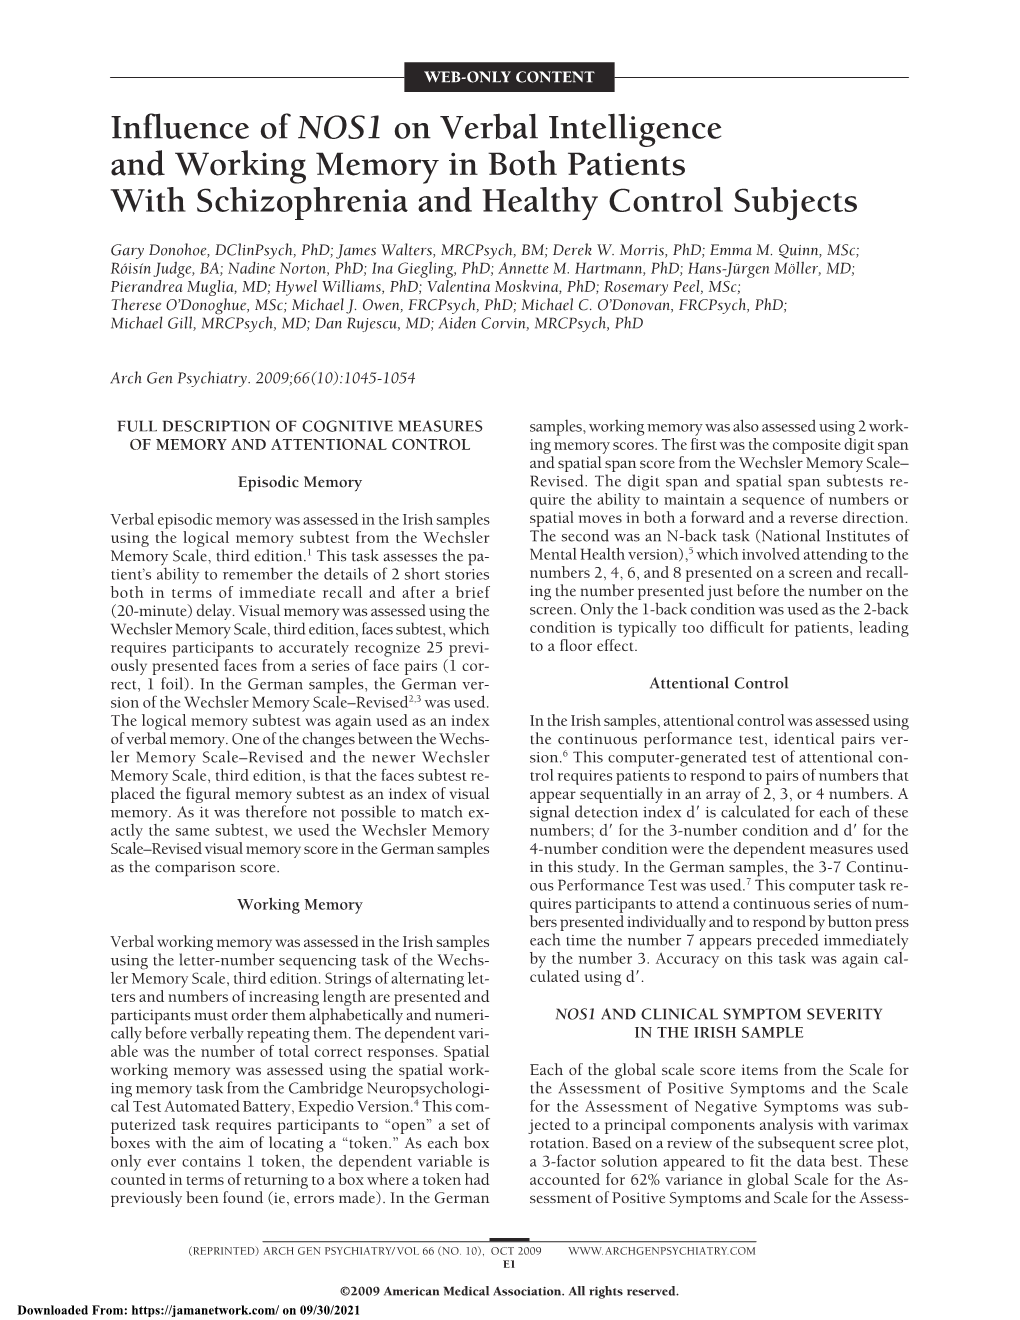 Influence of NOS1 on Verbal Intelligence and Working Memory in Both Patients with Schizophrenia and Healthy Control Subjects